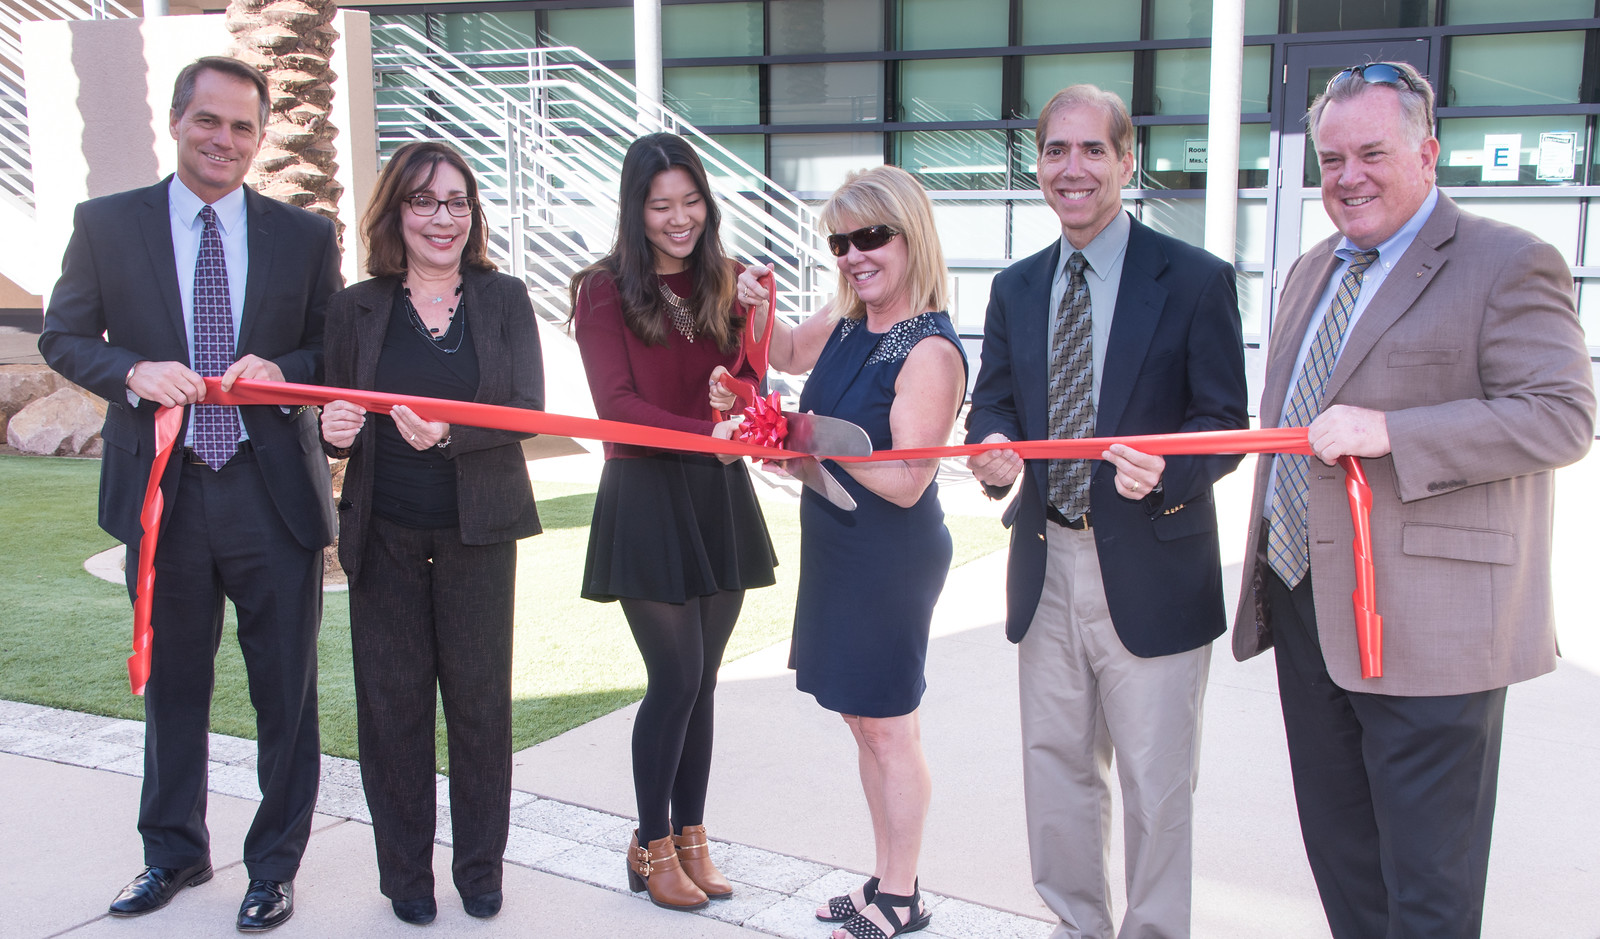 Beckman Humanities Building Ribbon-Cutting Ceremony #1 - November 2015